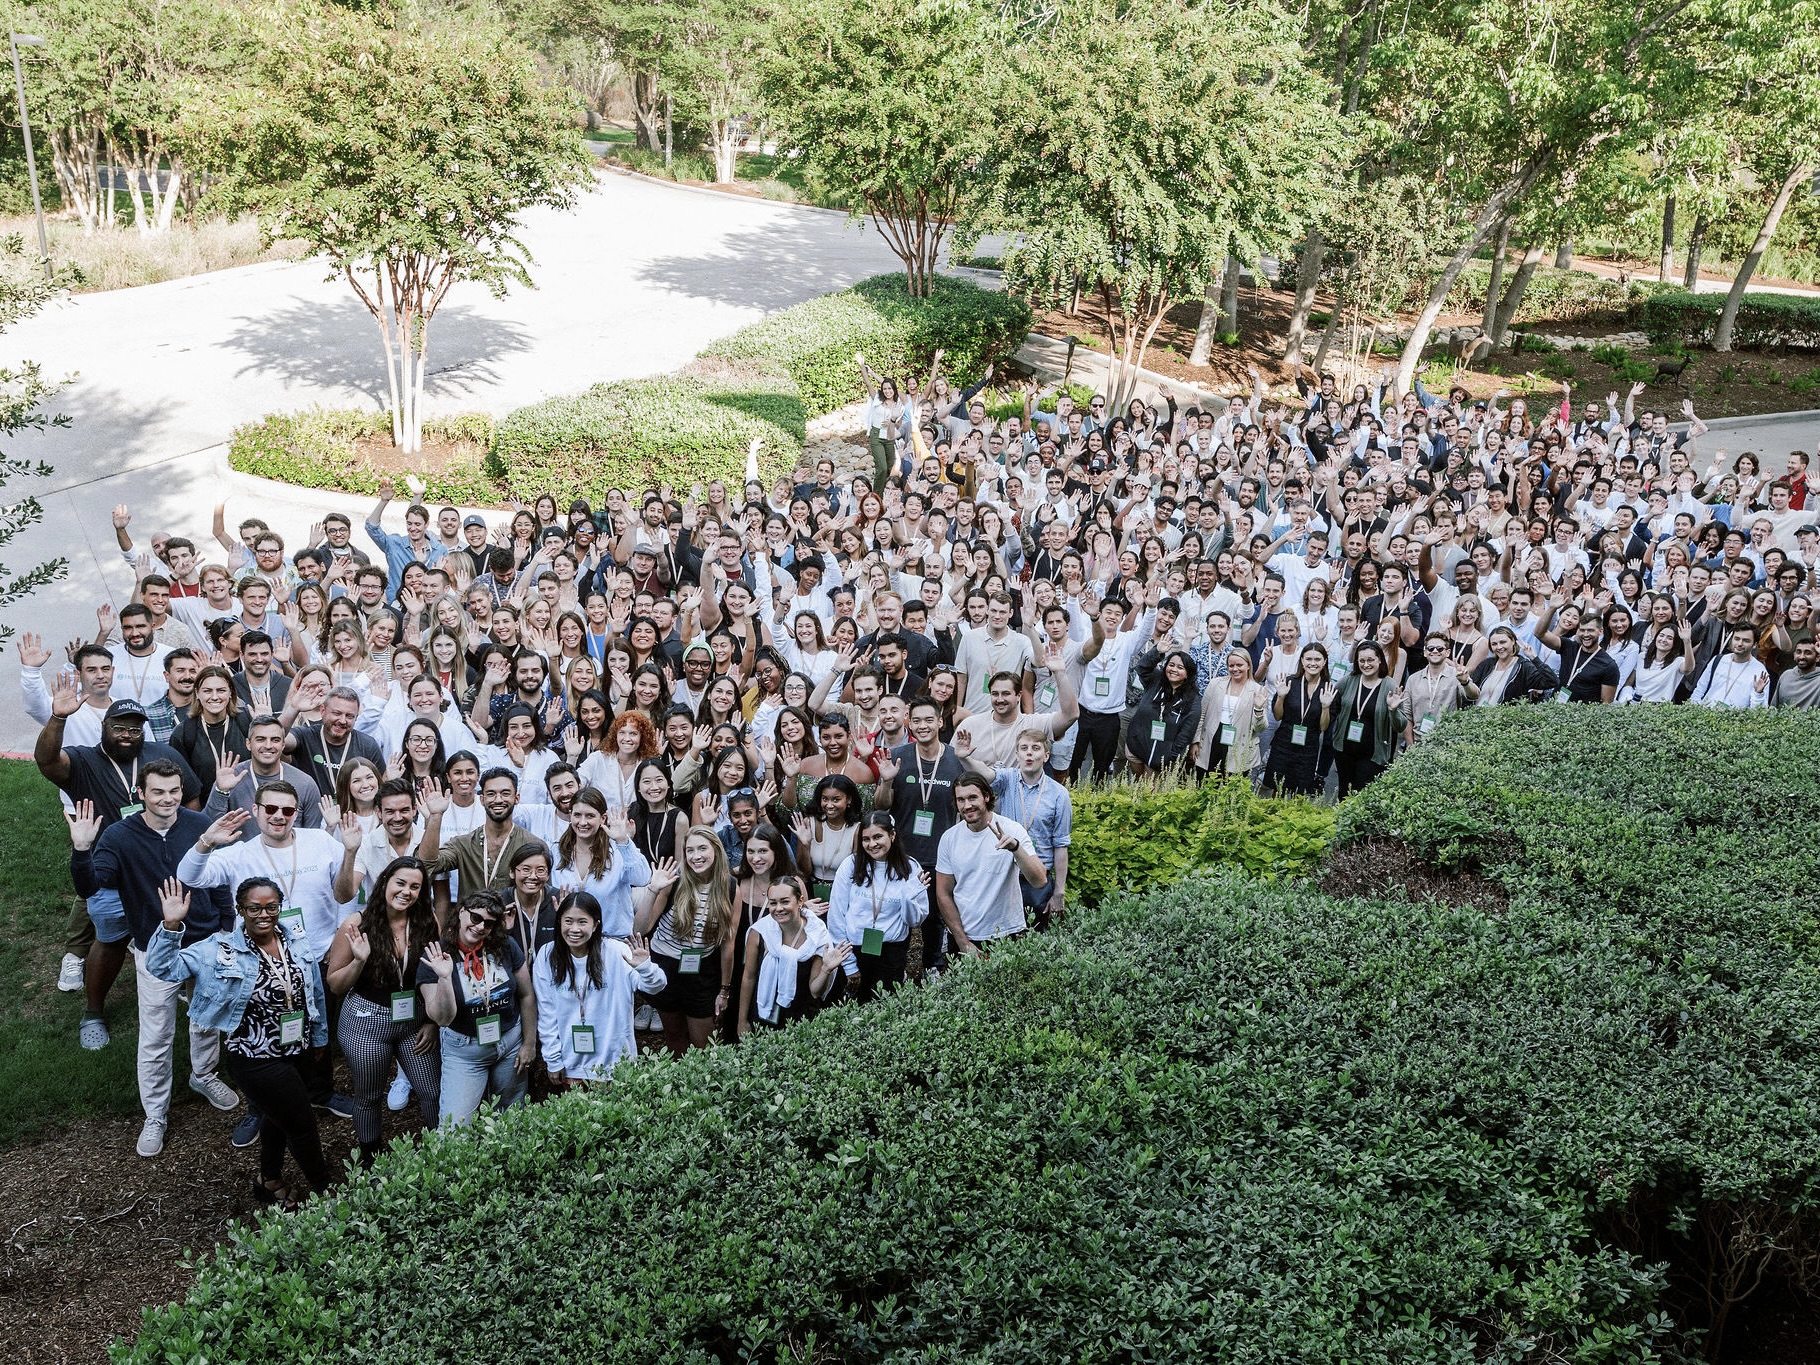 A huge crowd of Headway employees wave and smile in a group photo on the lawn of a parking lot.